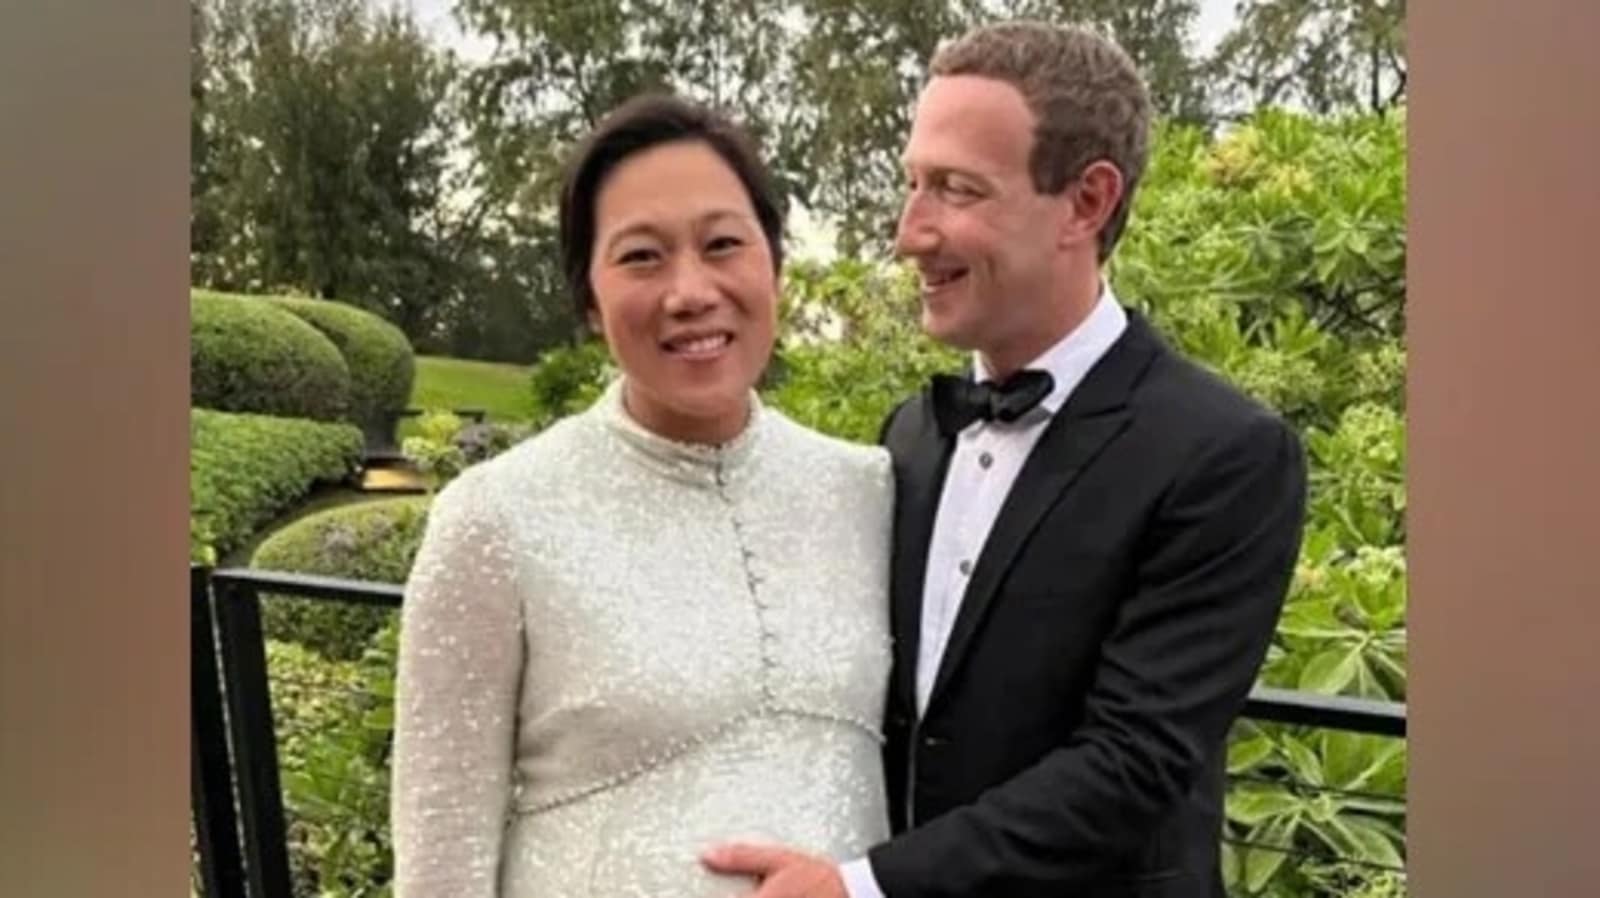 ‘Love coming in 2023’ Mark Zuckerberg shares photo with wife Priscilla Chan World News